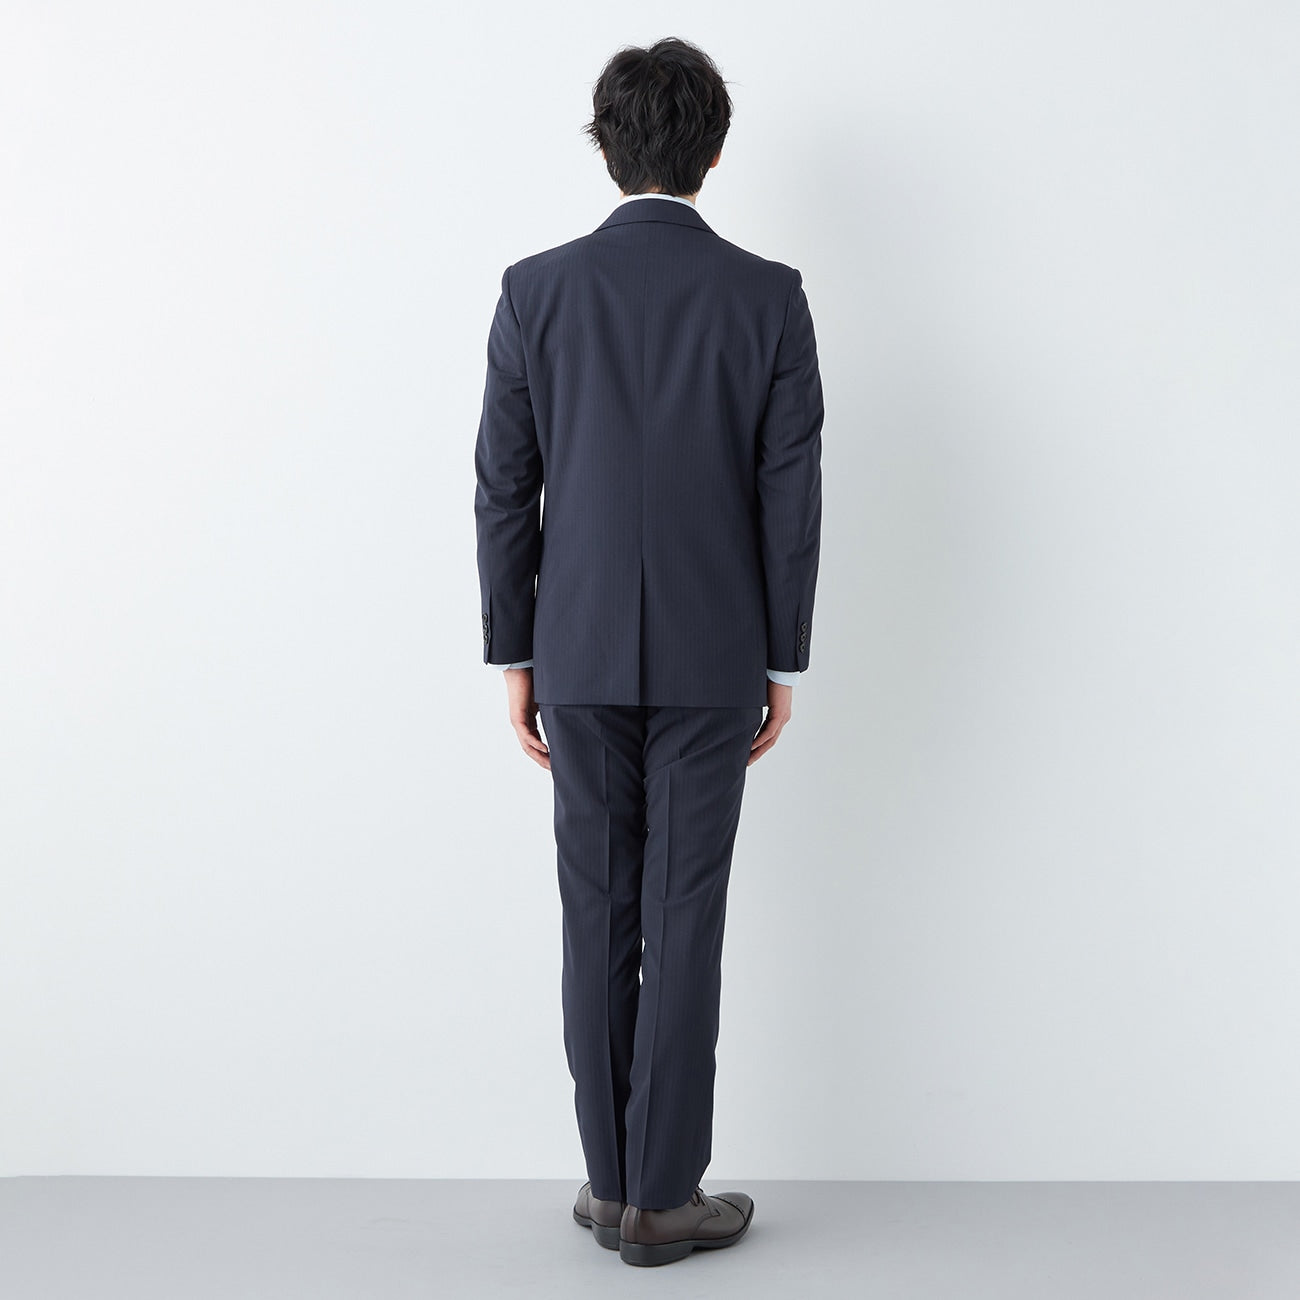 JOURNAL WORKS Navy Blue Woven Stripe Slim Suit [Recycled Material]